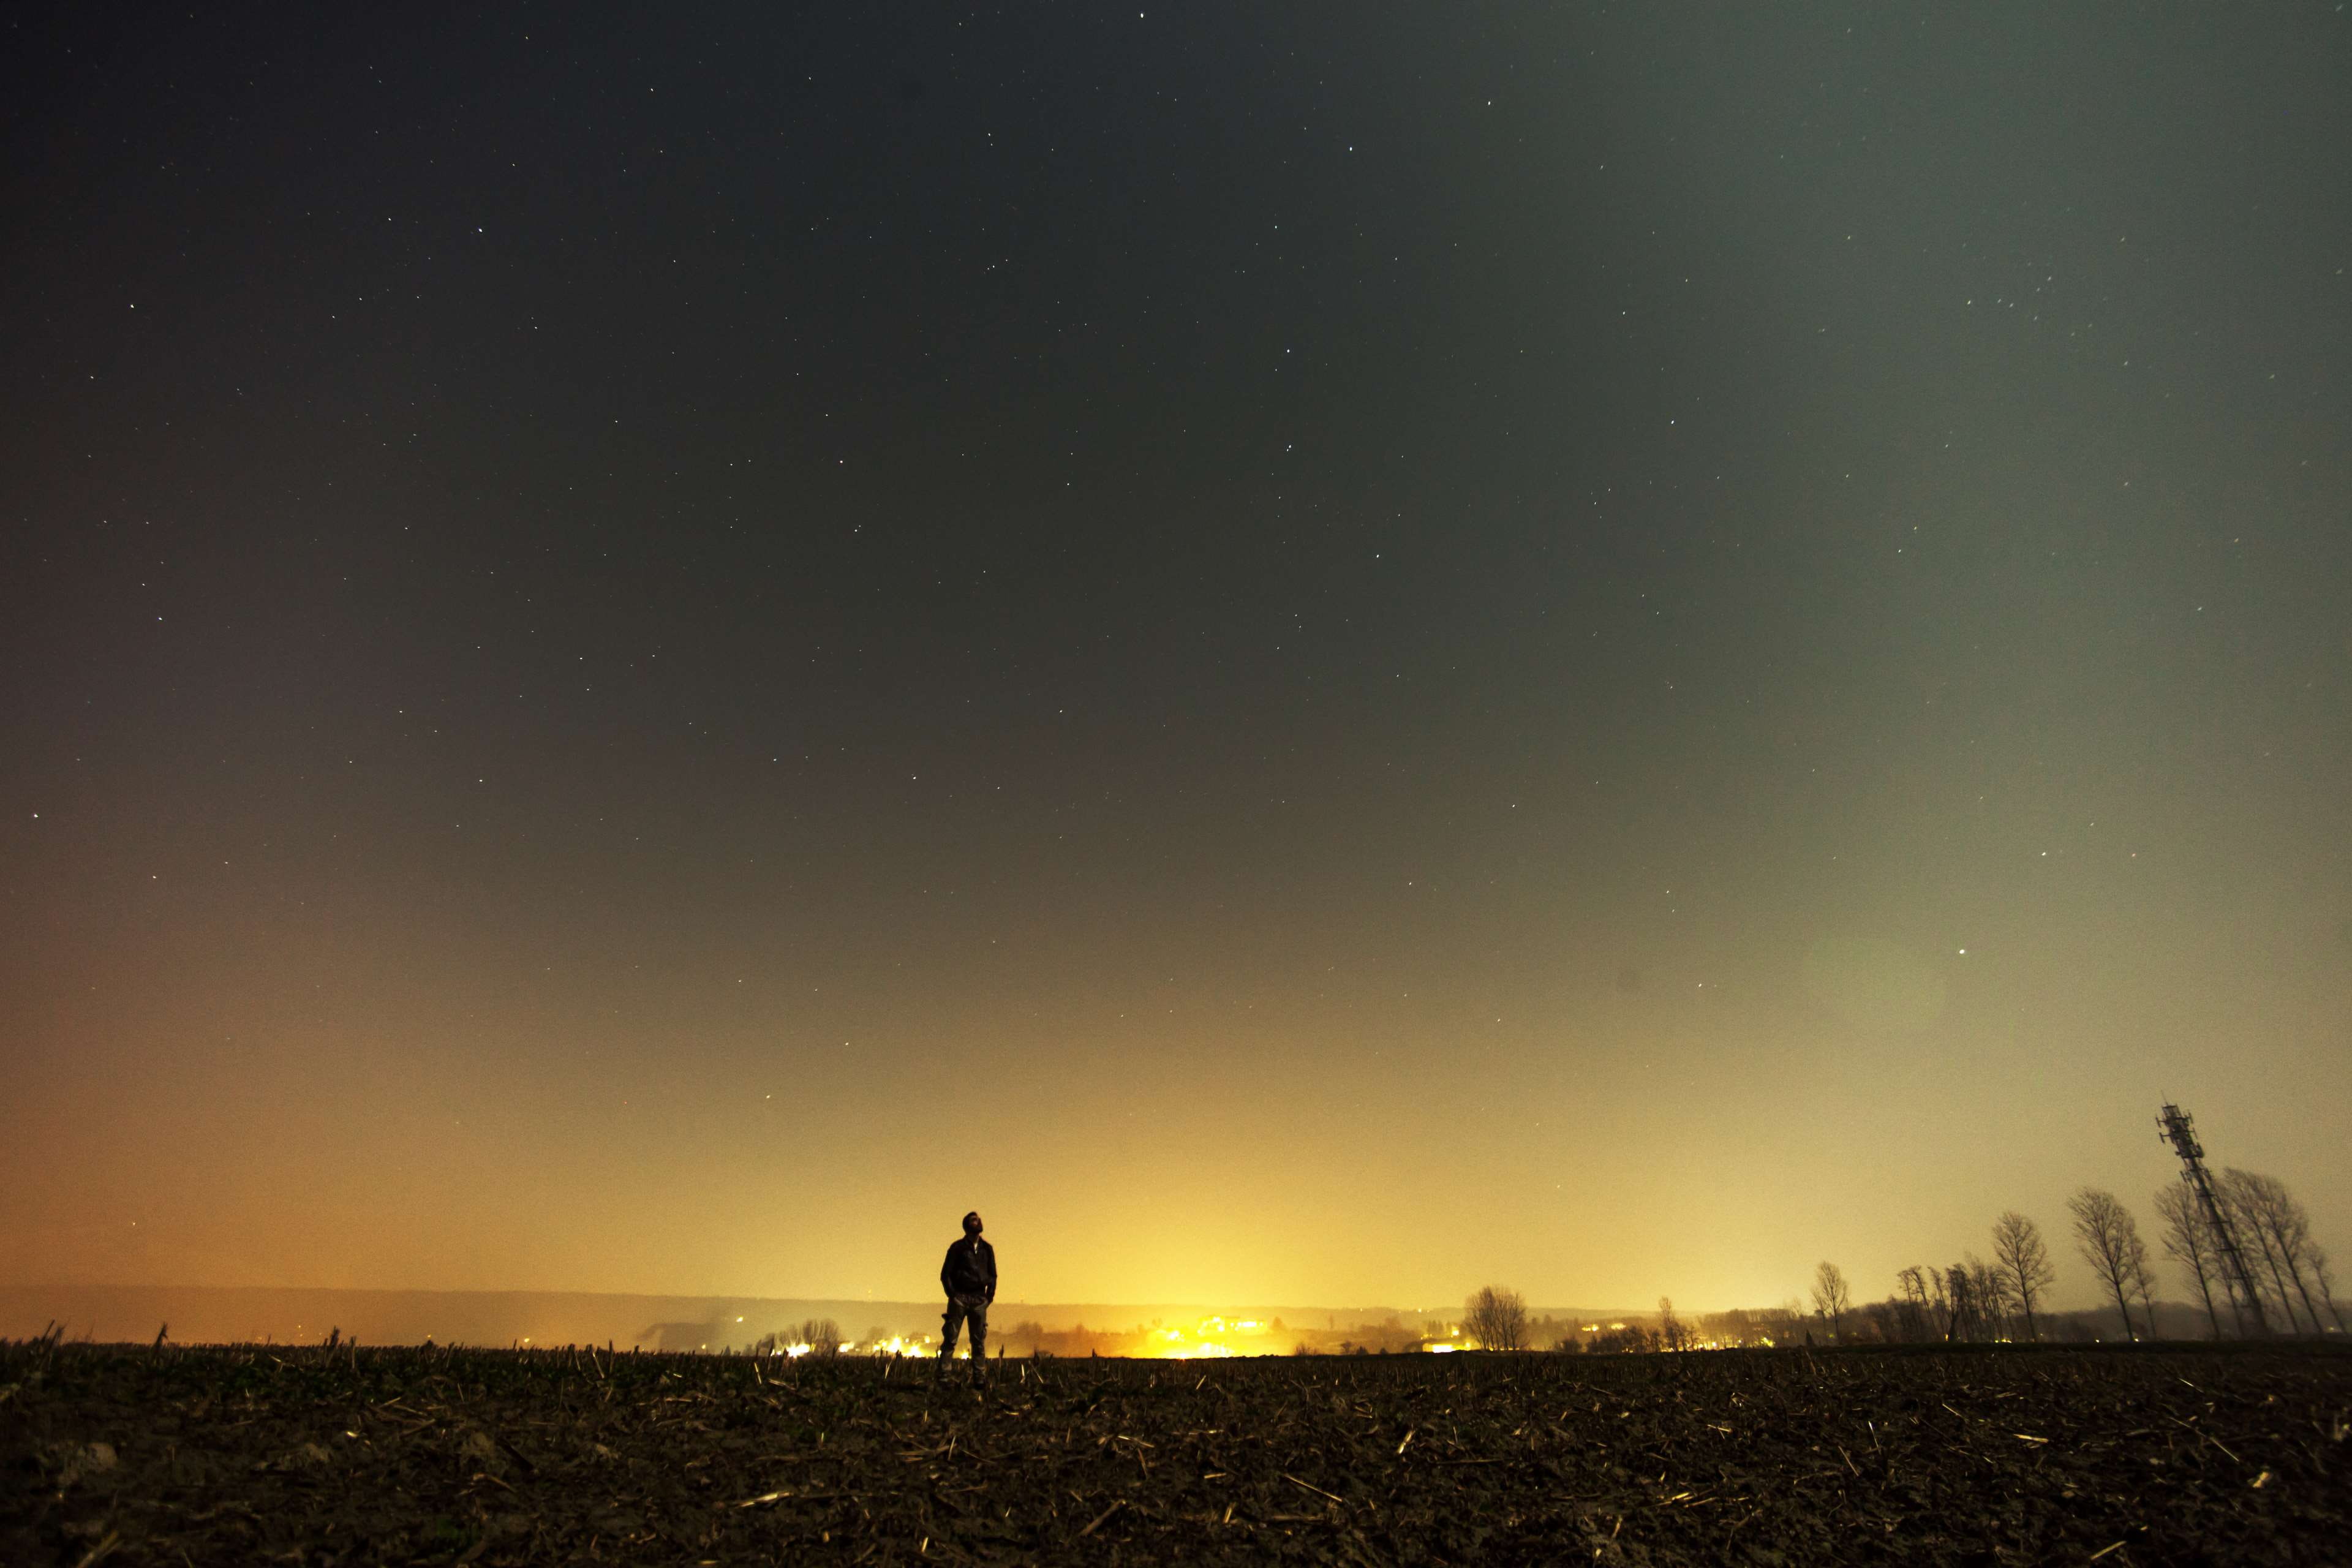 alone, lonely, man, night, person, sky, starry, stars, star - space